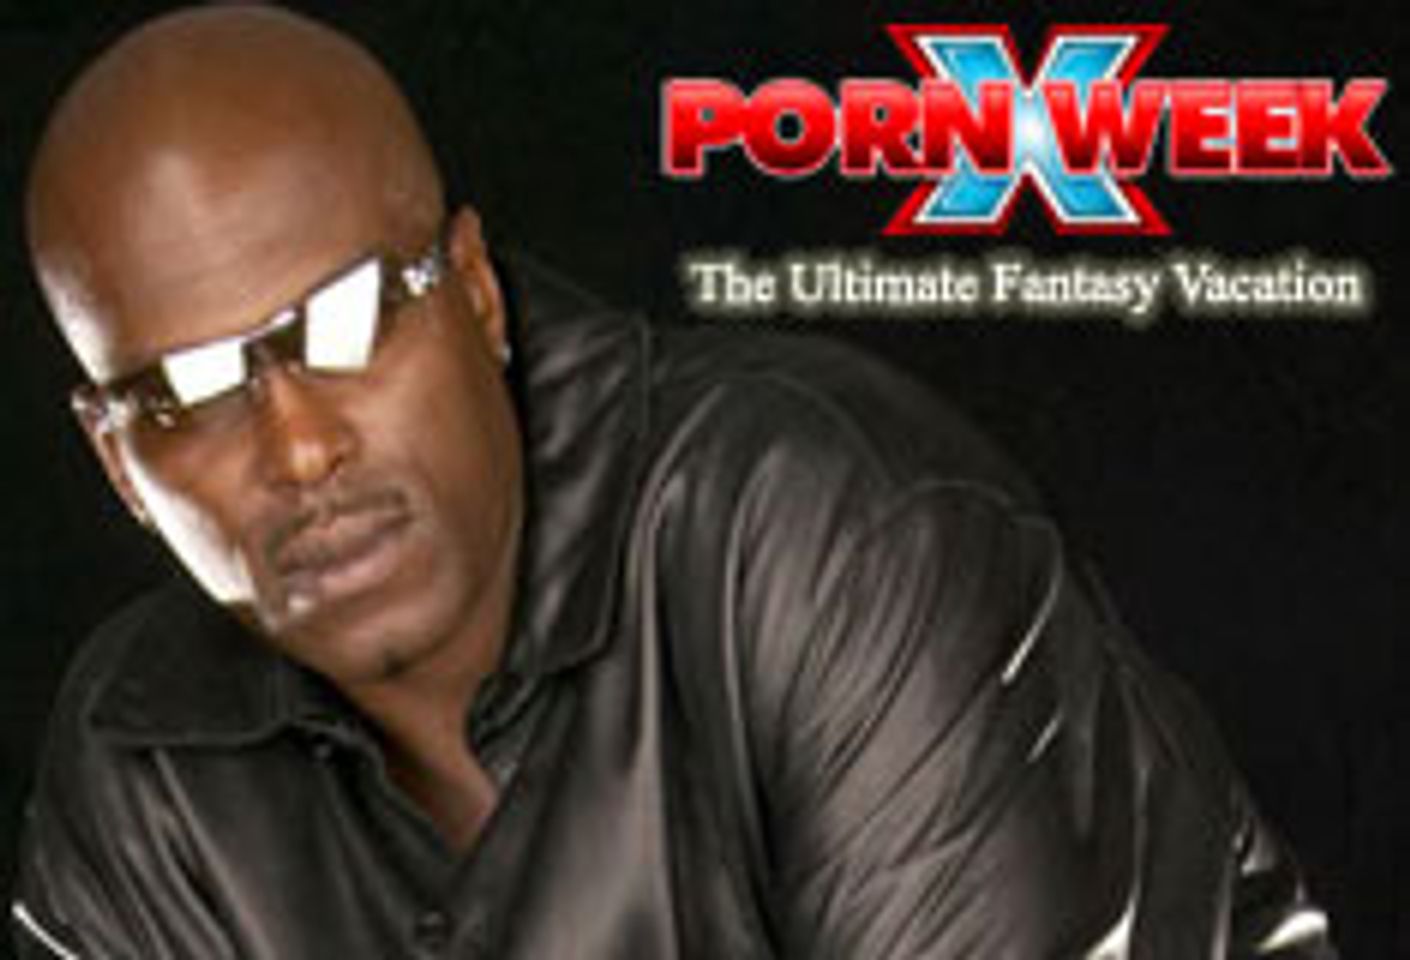 Lexington Steele to Host Porn Week Party in L.A.